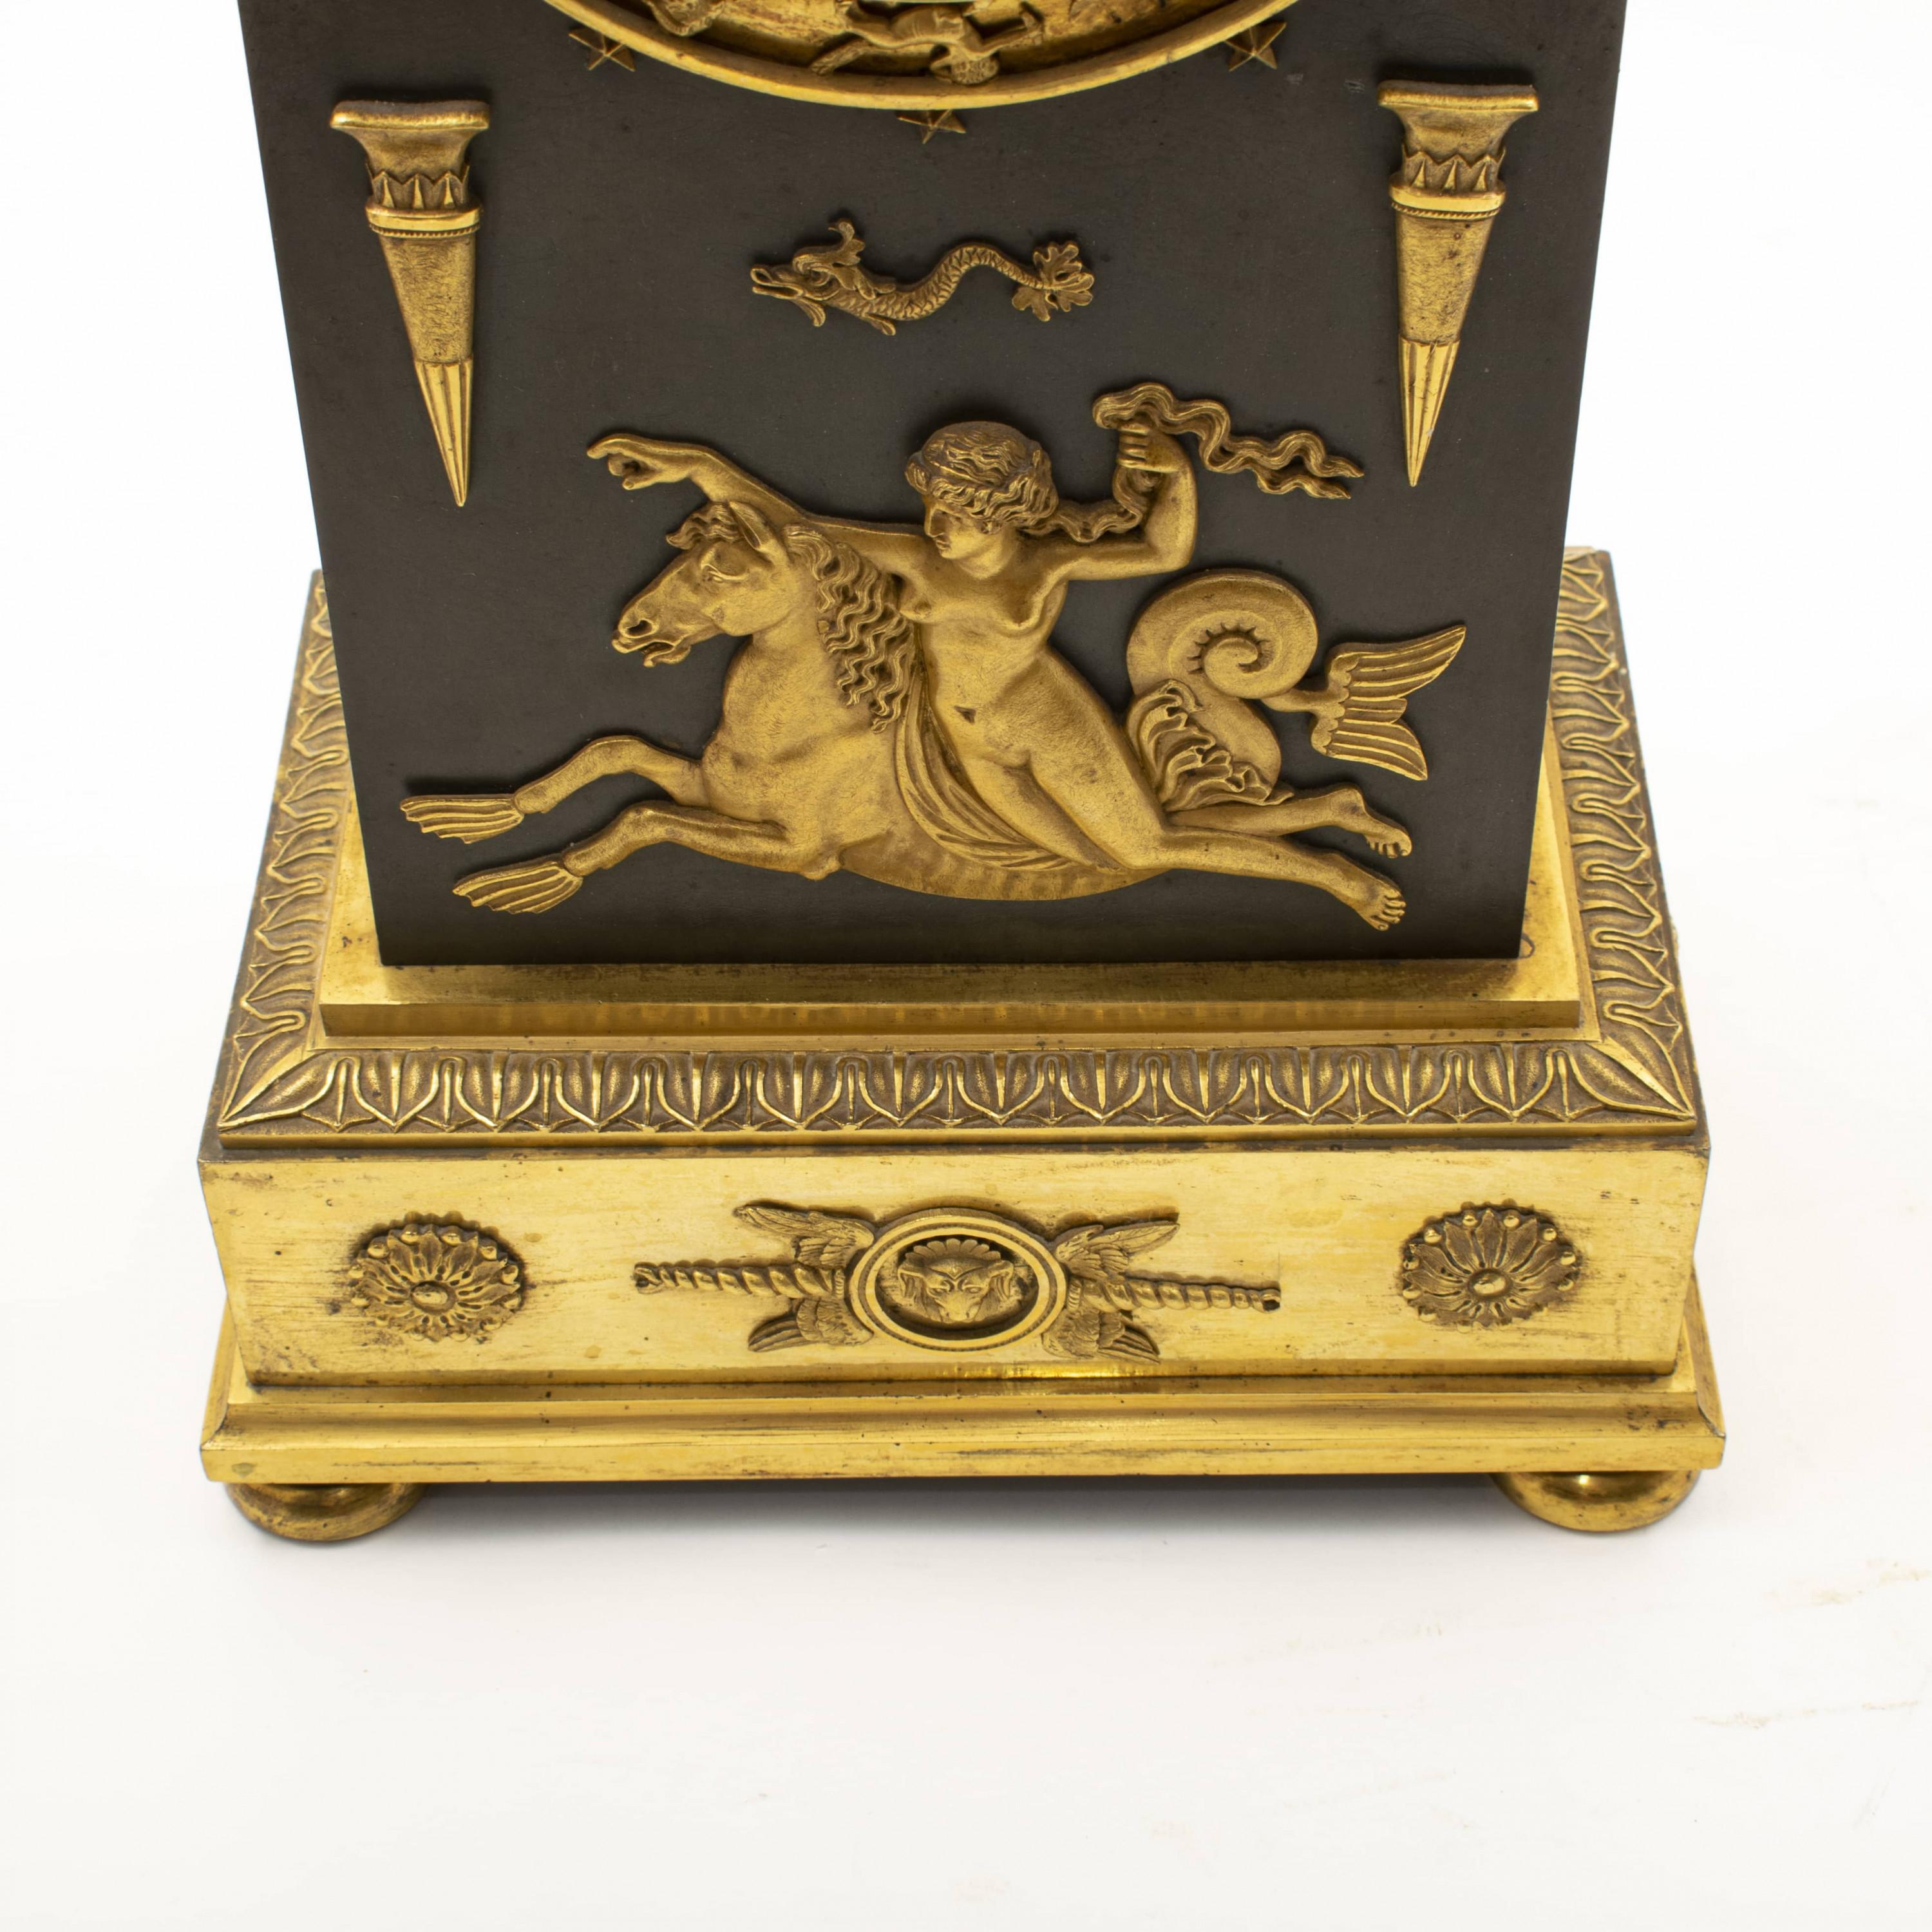 19th Century French Empire Ormolu & Patinated Bronze Clock with the 12 Zodiac Signs & Siren